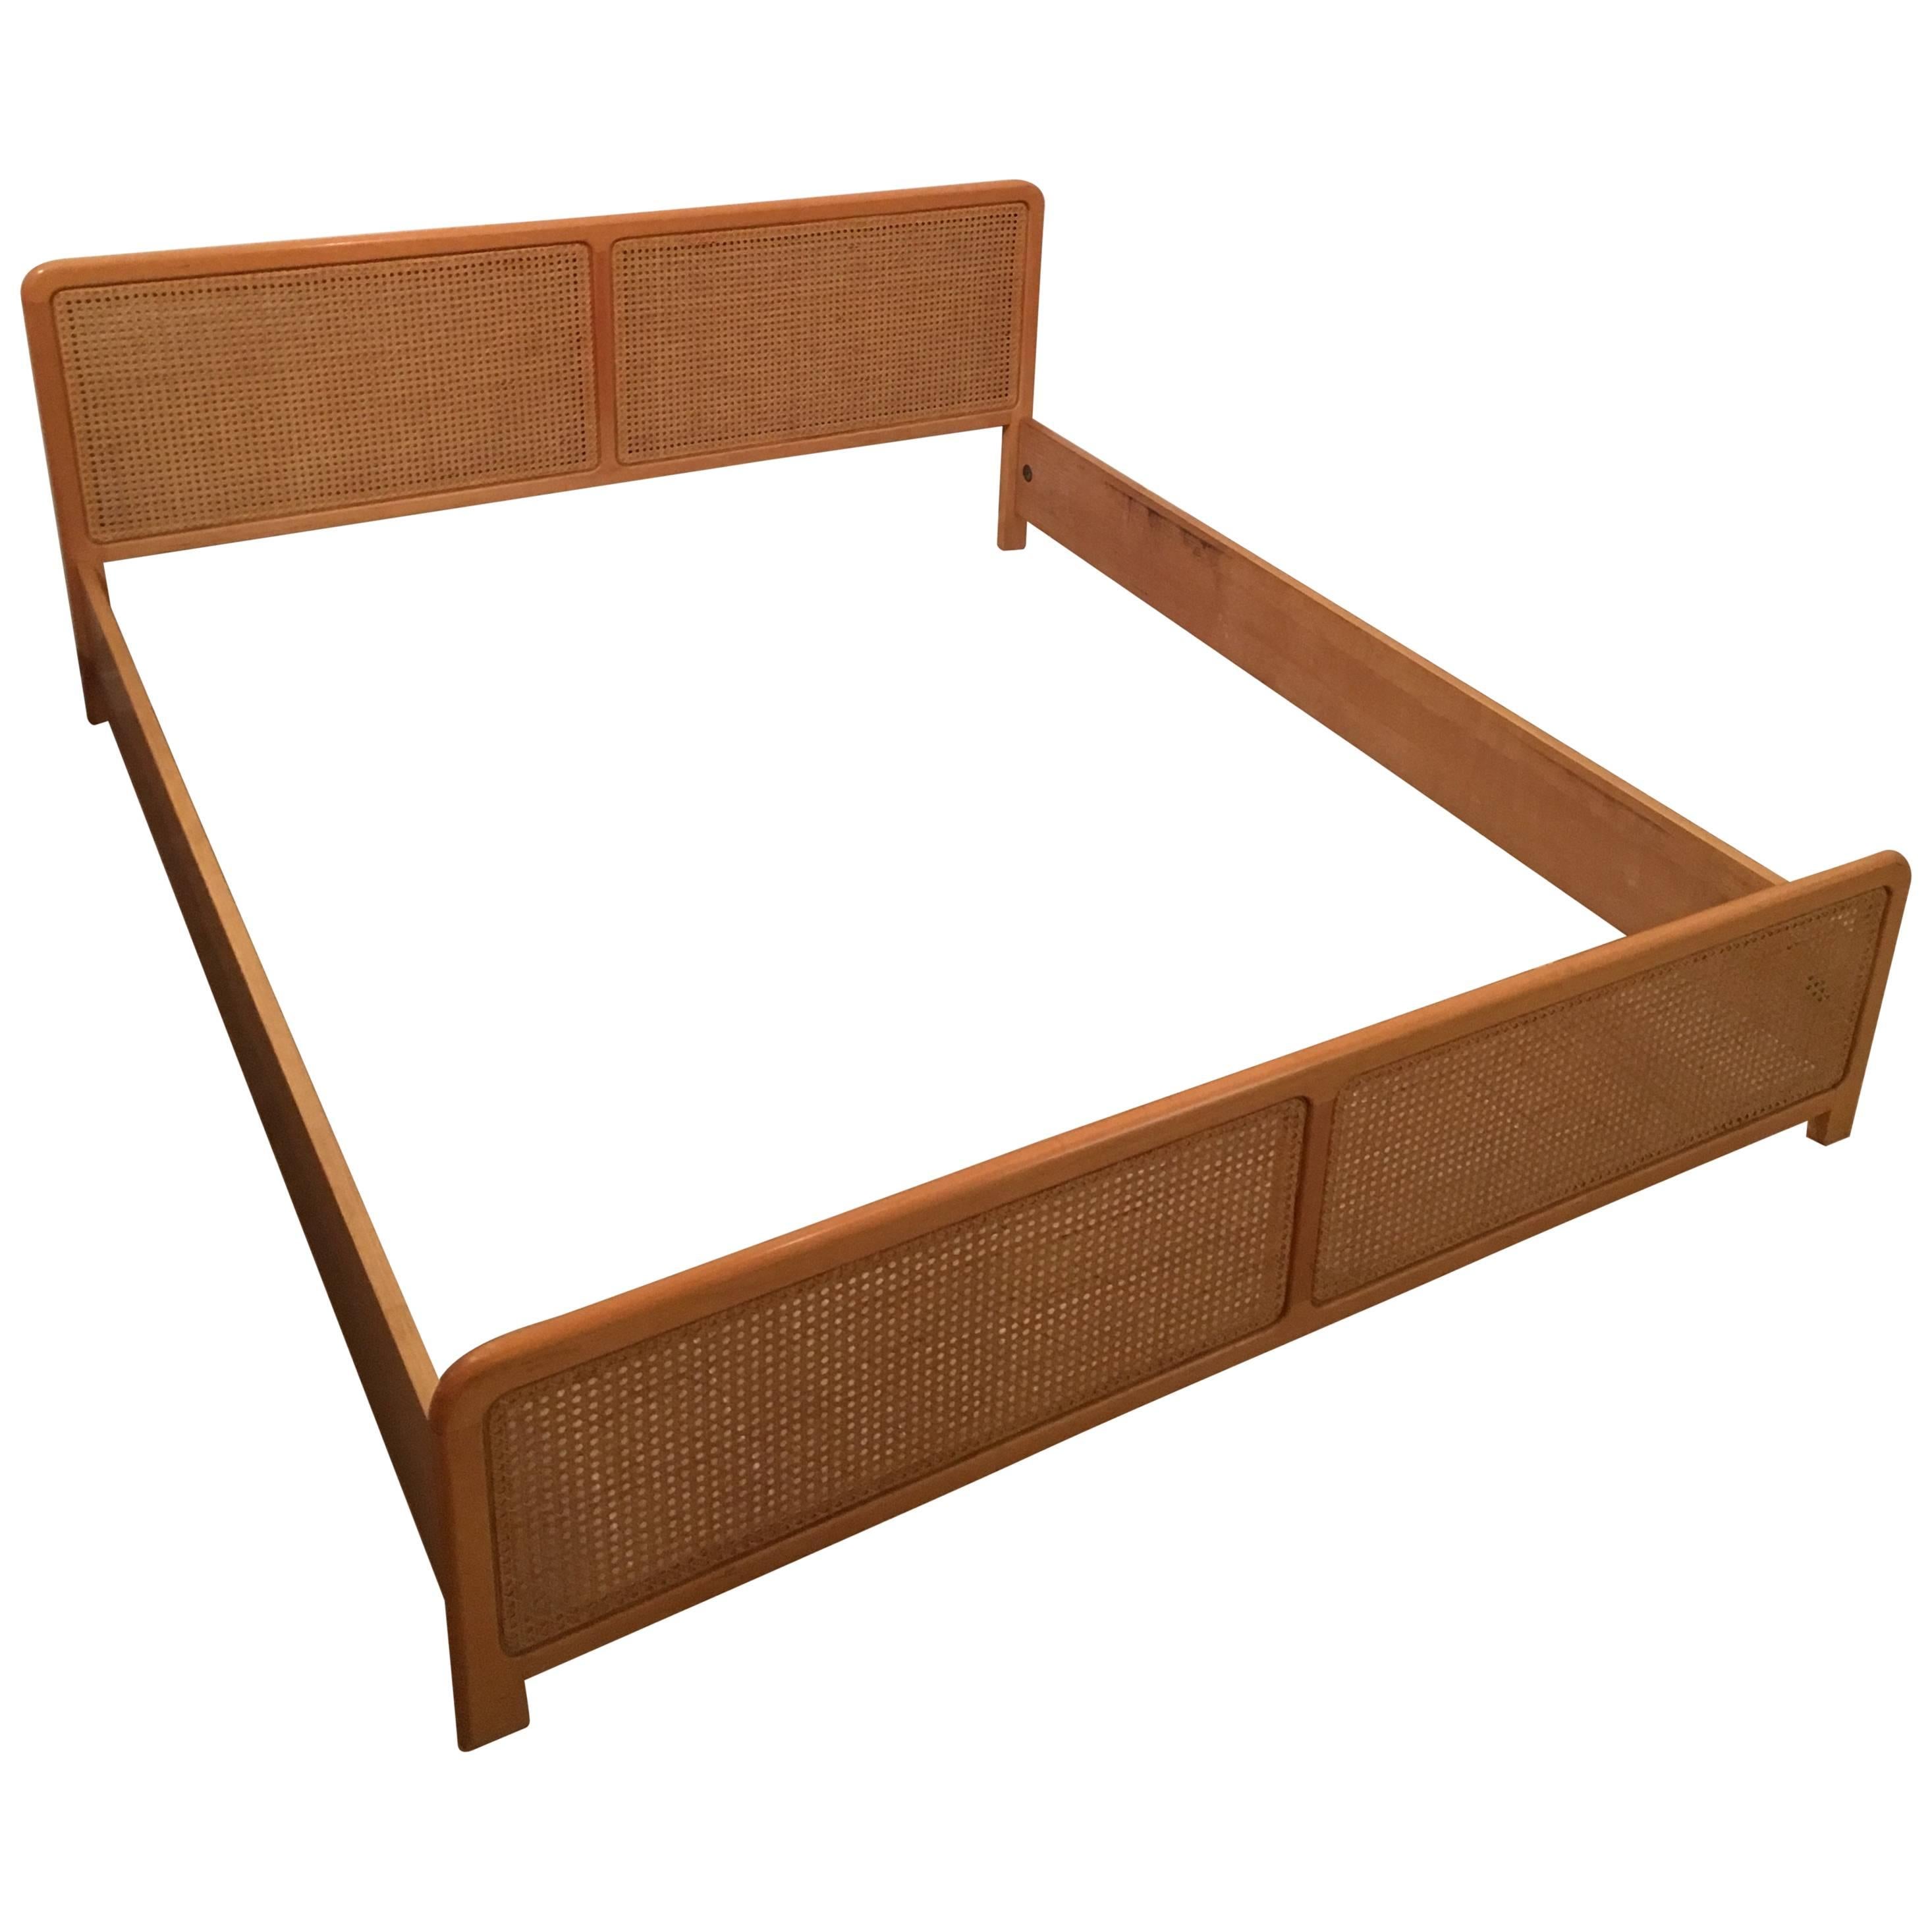 Wooden Cane Double Bed Frame